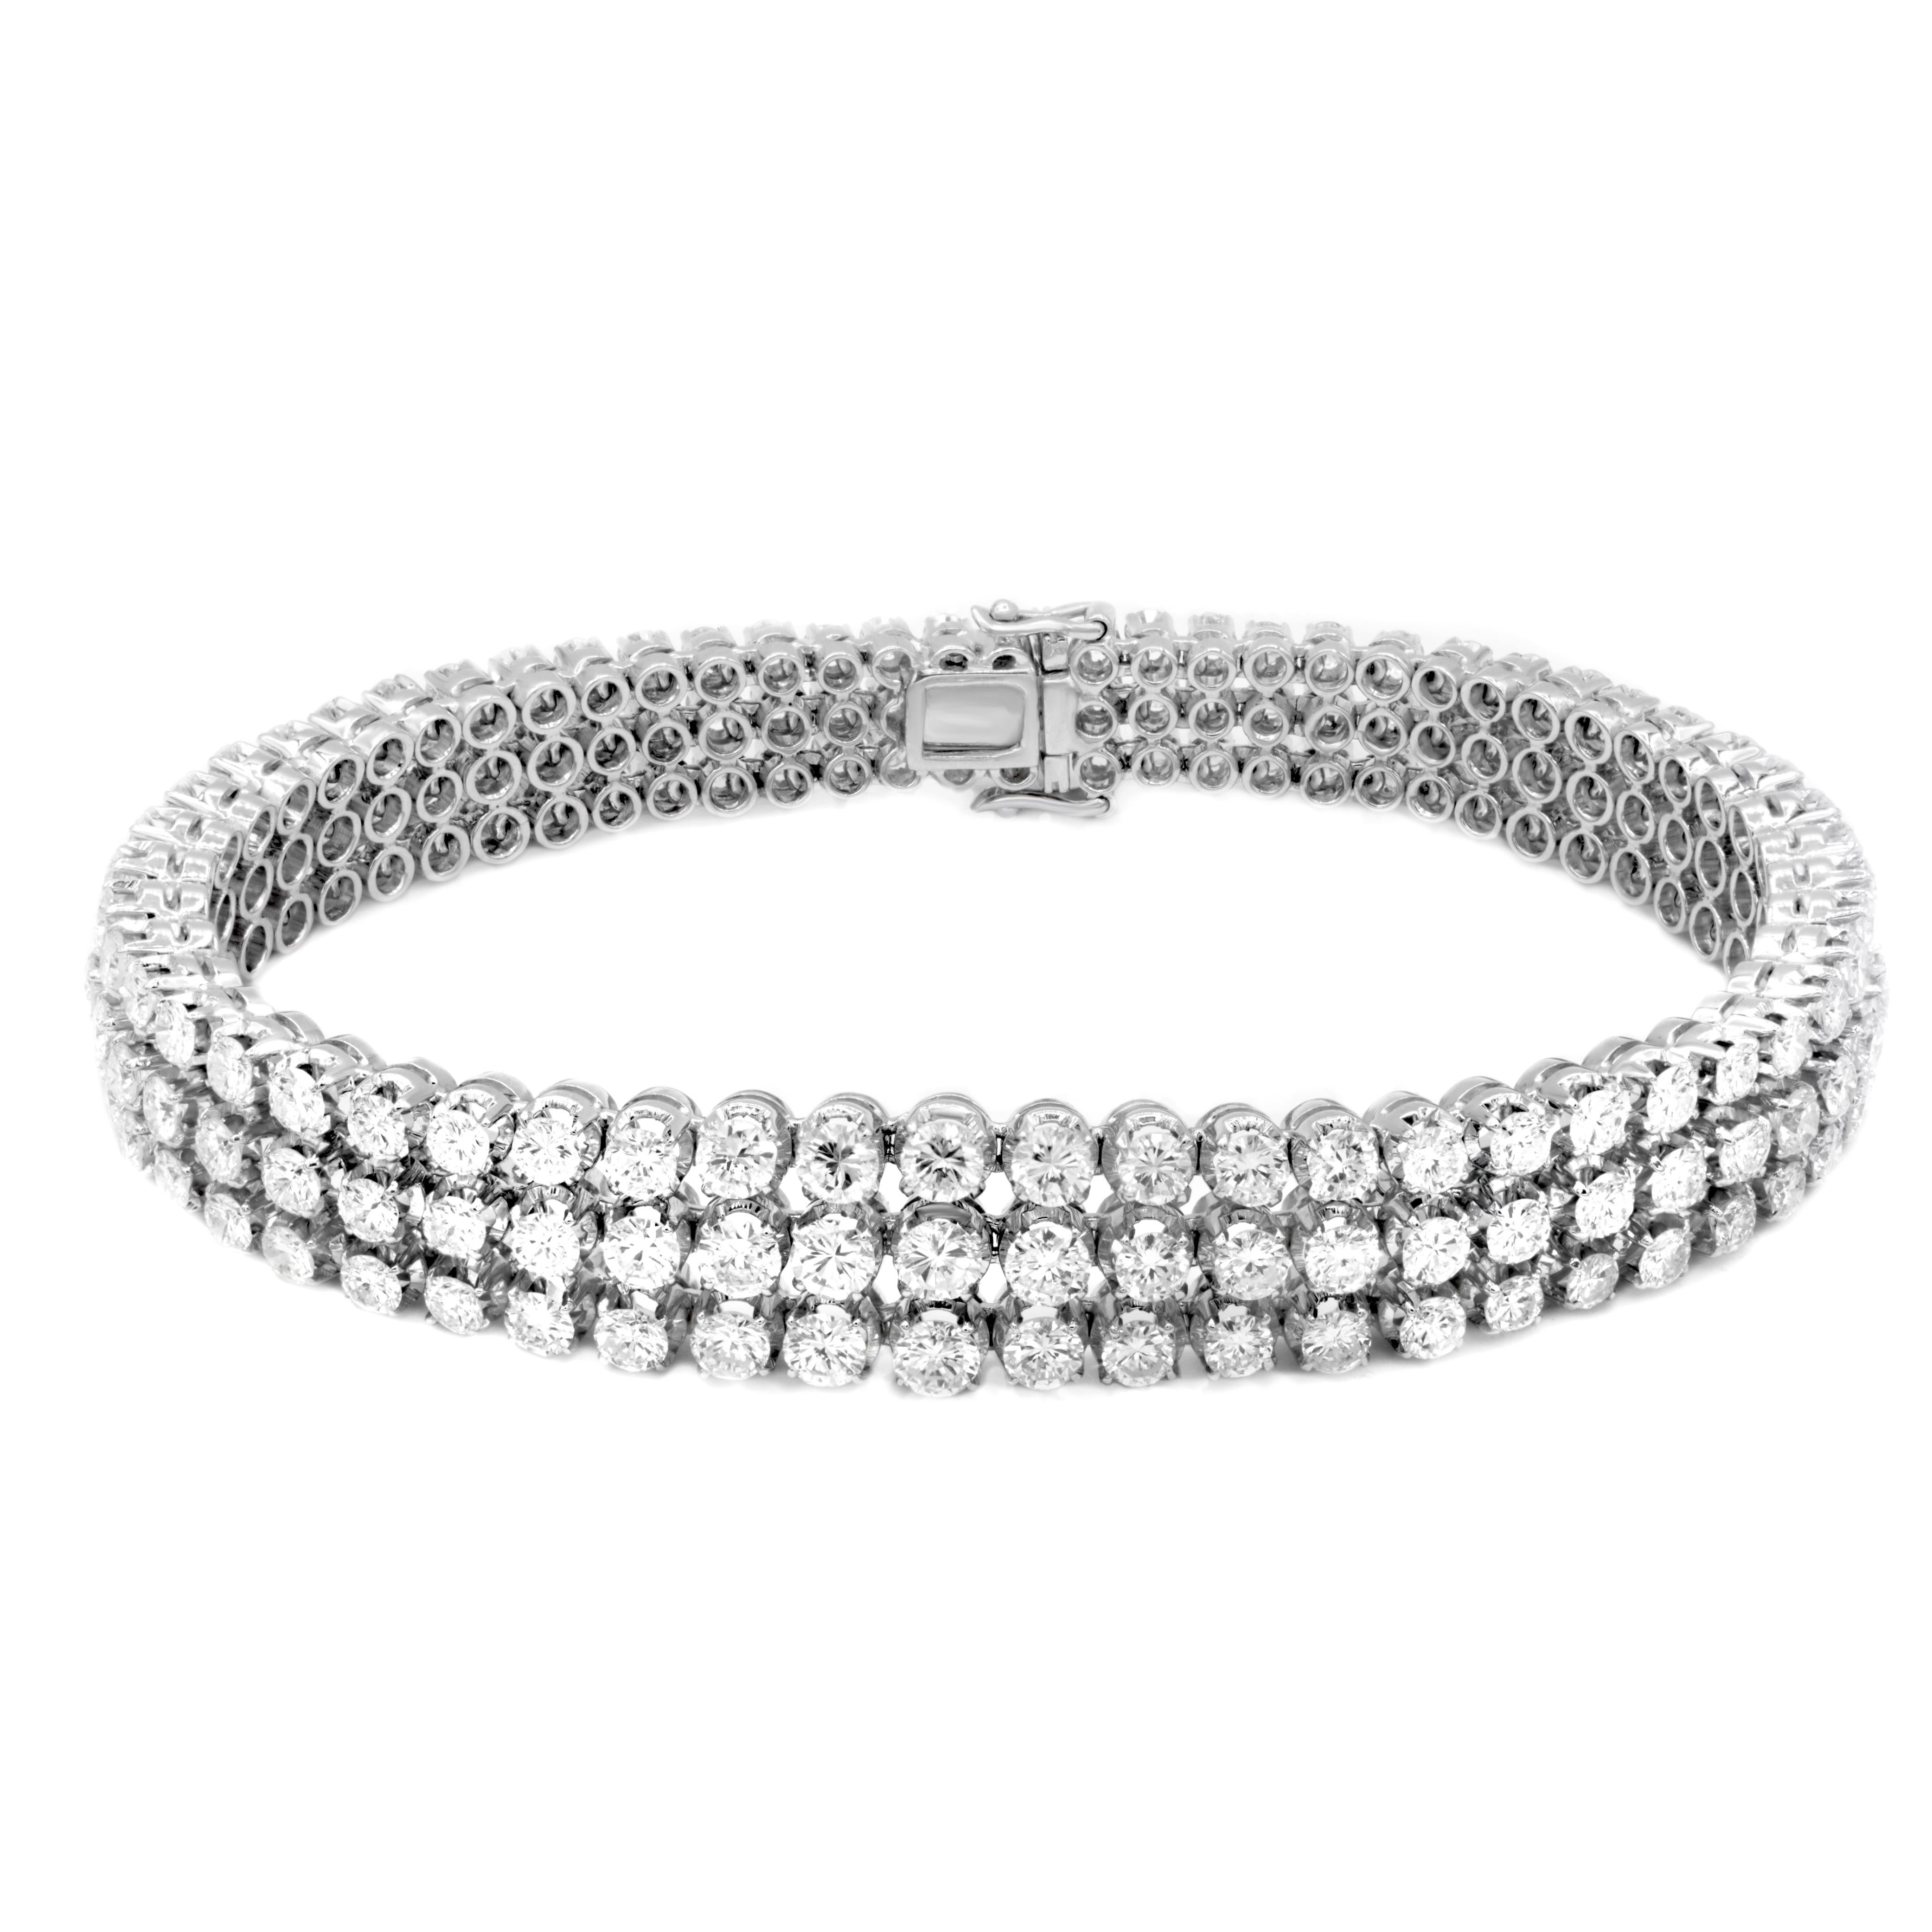 18kt white gold bracelet featuring 3 rows of 9.00 cts tw of round diamonds (H-I VS)
Diana M is one-stop shop for all your jewelry shopping, carrying line of diamond rings, earrings, bracelets, necklaces, and other fine jewelry.
We create our jewelry